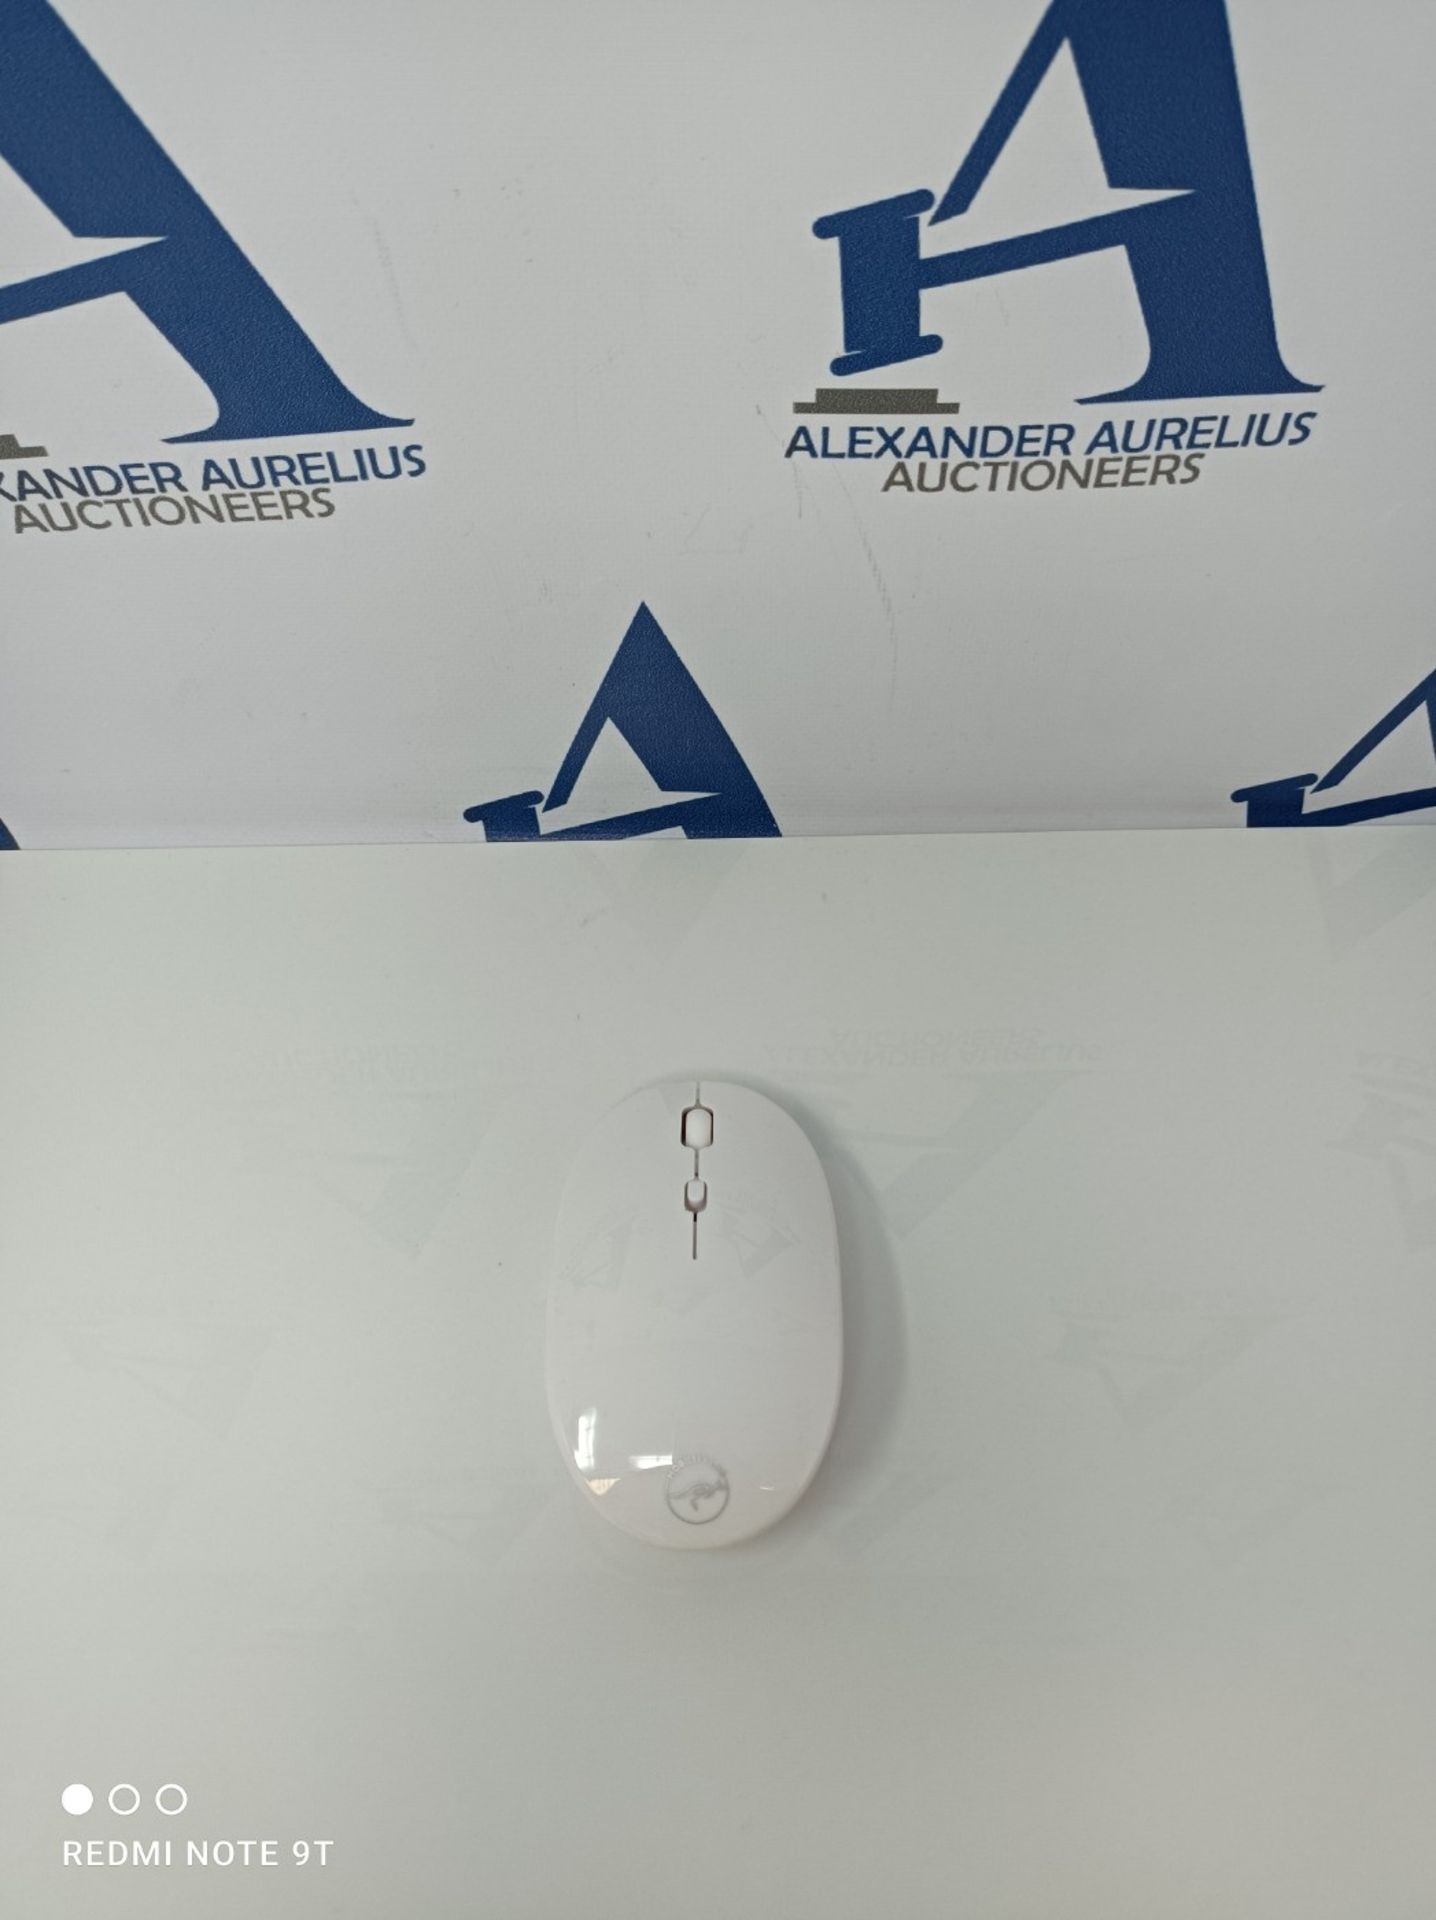 Mobility Lab ML301877 Bluetooth Laser Mouse 1600 DPI for Mac and PC - White - Image 3 of 3